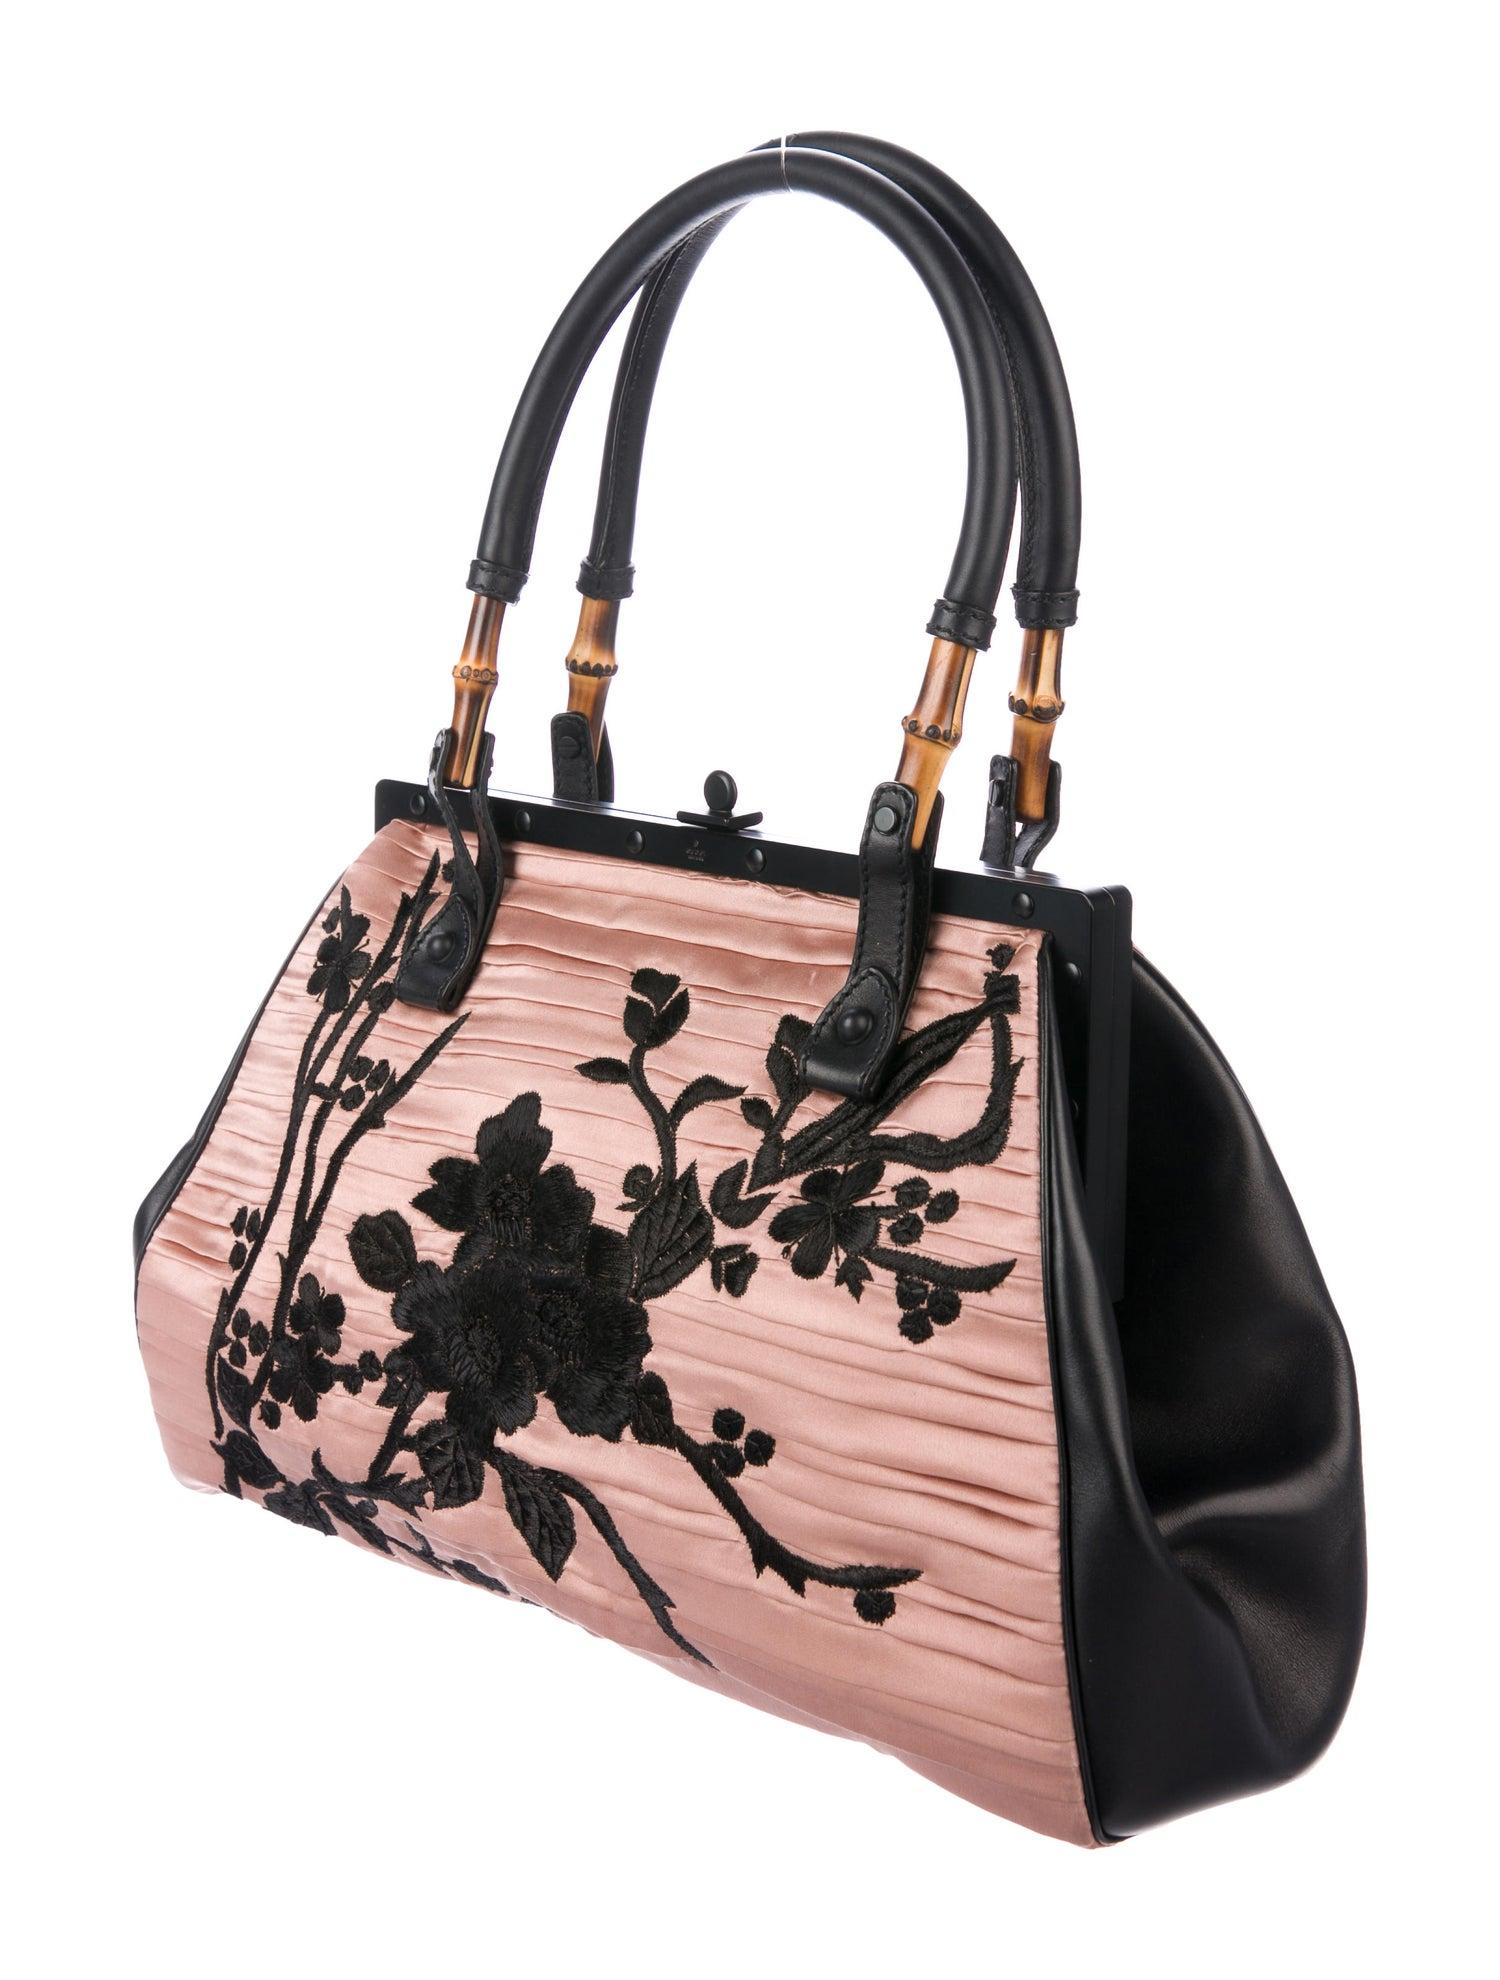 New Tom Ford For Gucci Black Silk Frame Japanese Flowers Bag
S/S 2003 Collection
N 112528 204990
Rare And Collectible
Color – Black and Beige
Silk, Leather, Bamboo
Floral Japanese Embroidery In Black On Both Sides, Leather Side Panels, Frame-shaped